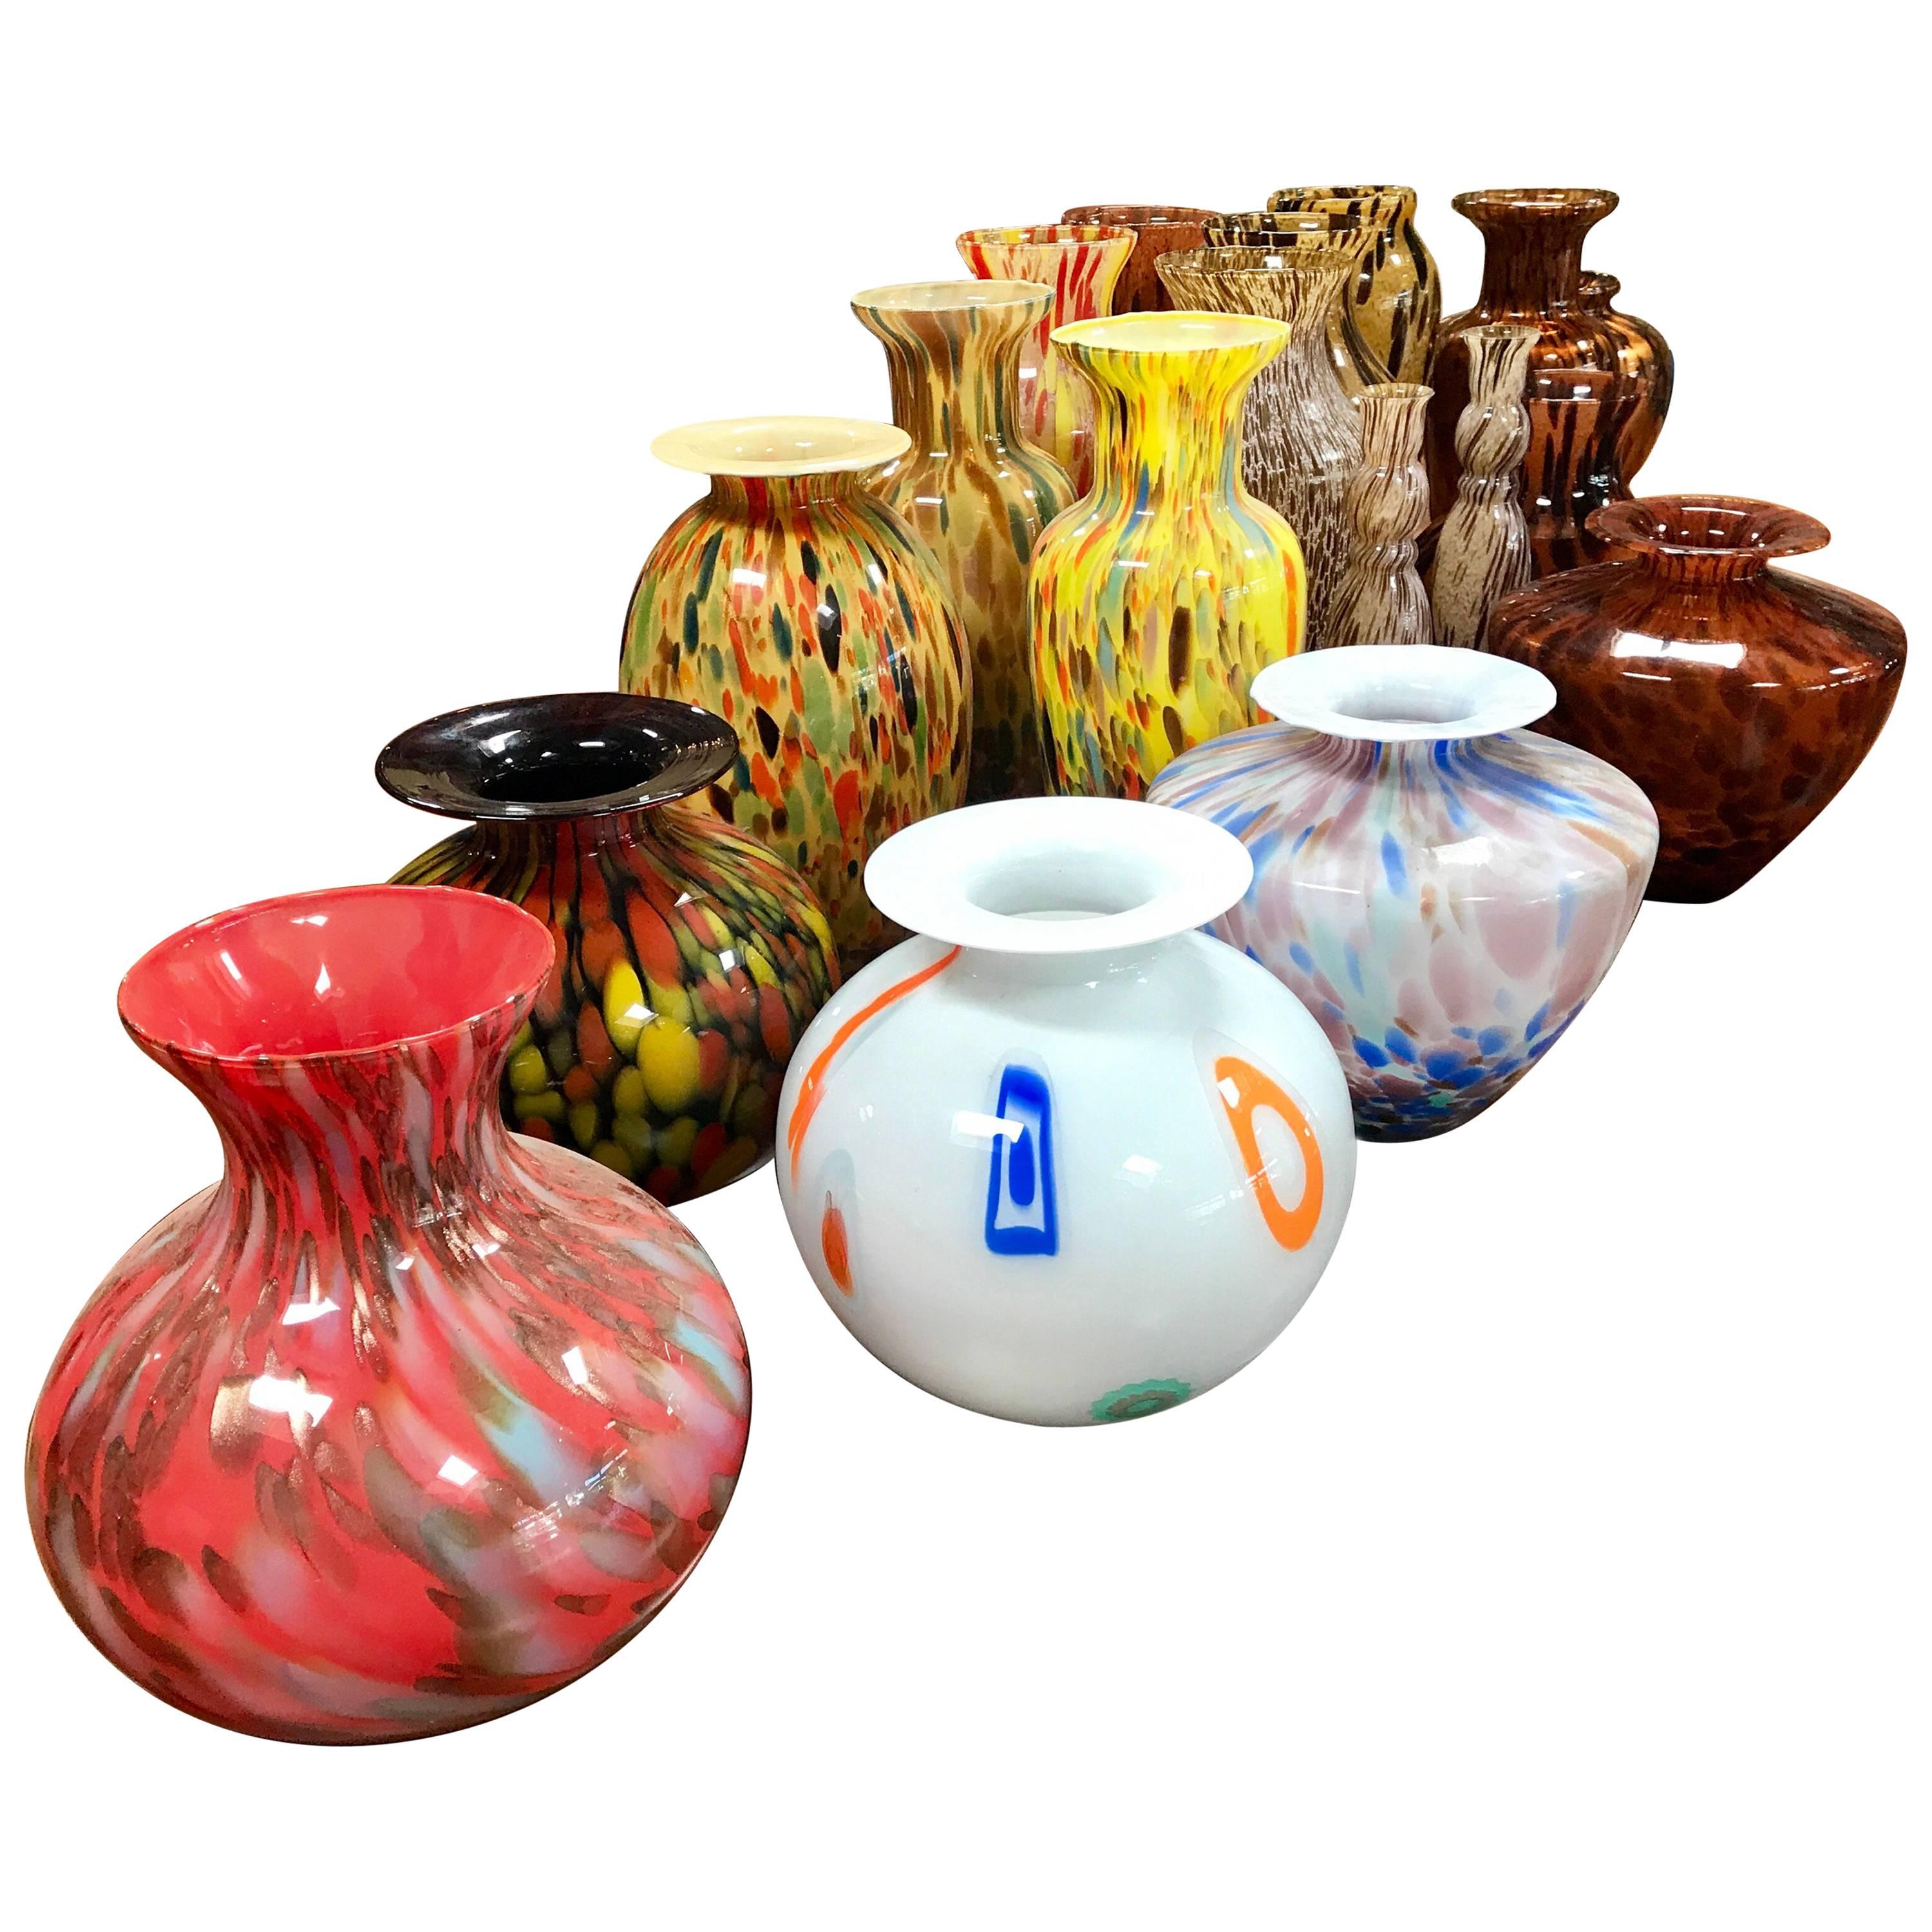 Florentine Handblown Vase in Various Shapes, Sizes and Colors from the 1980s